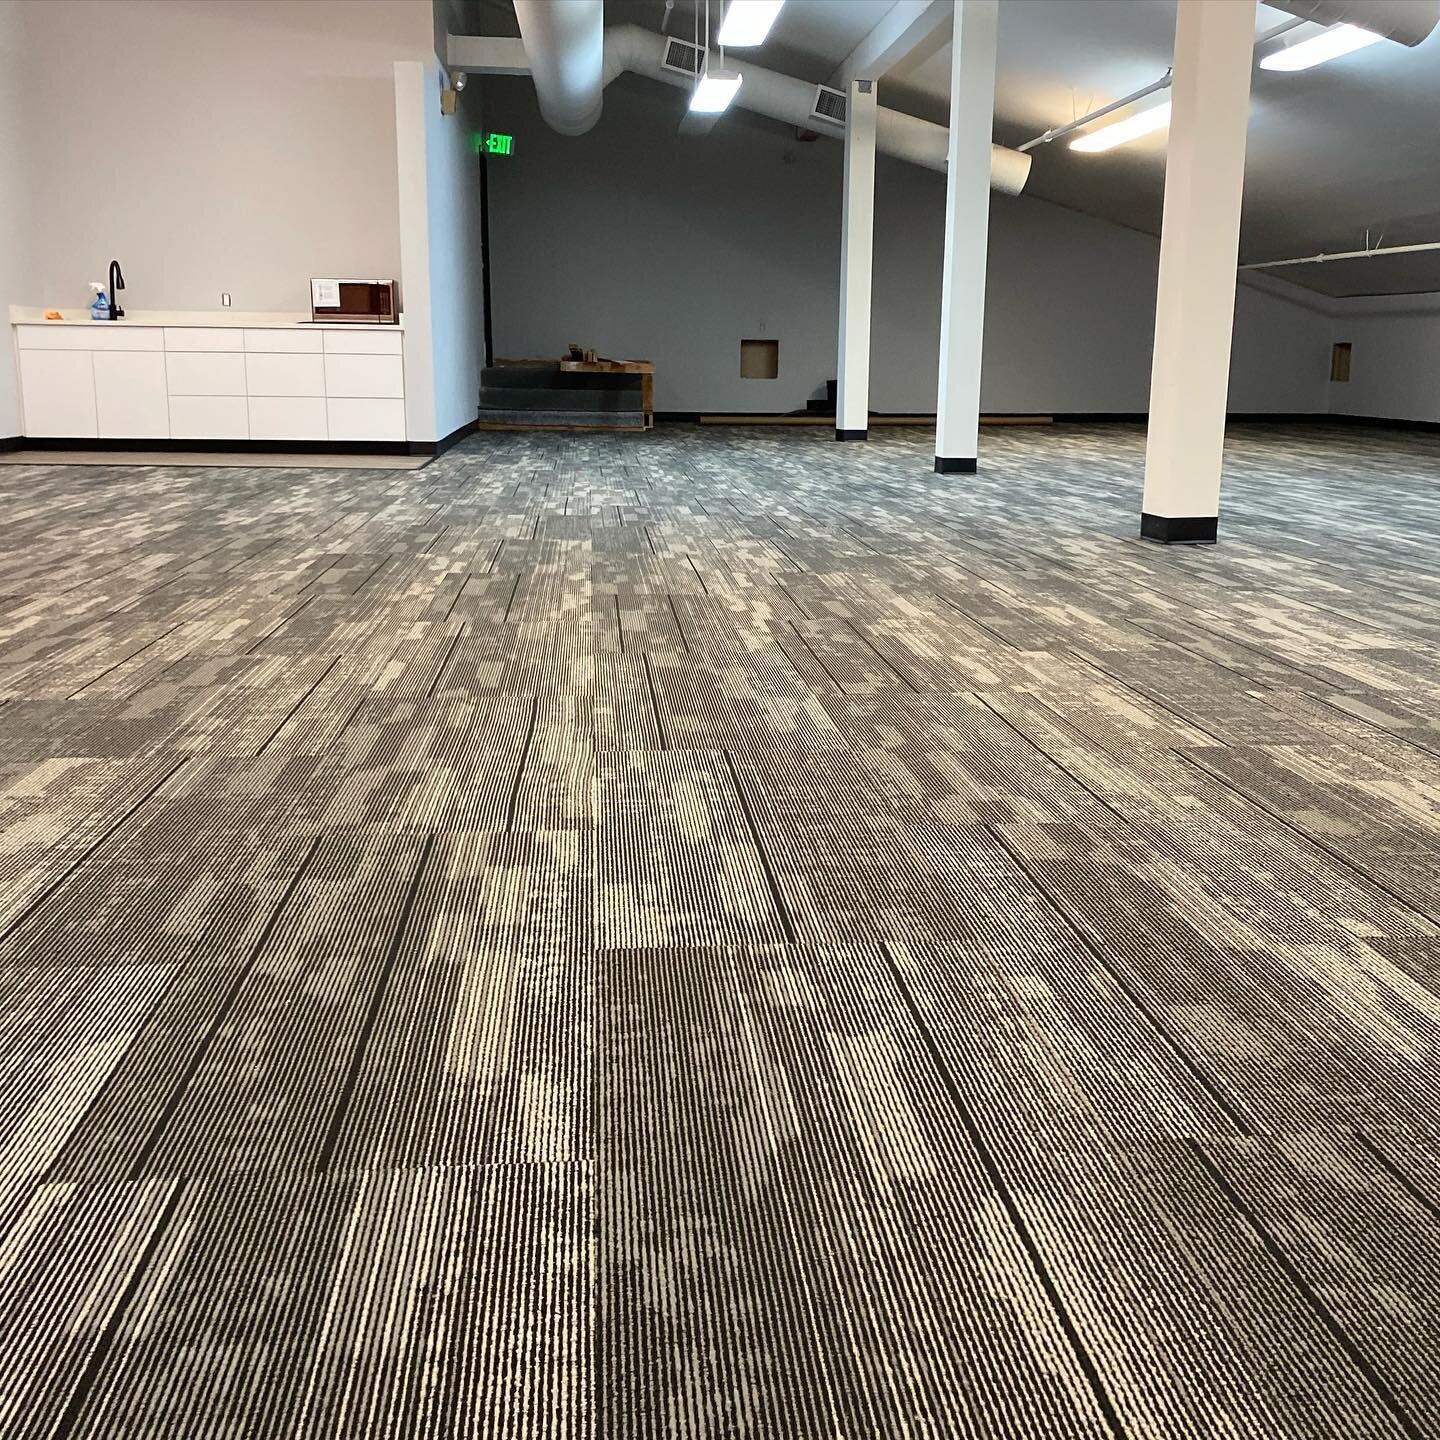 Office spaces, conference rooms, churches, HOA buildings, home gyms, and more. We install commercial carpet and had surfaces here at Koebers!
 #officelife #commercialinteriors #interiordesign #officedesign #churchflooring #commercialcarpet #carpettil